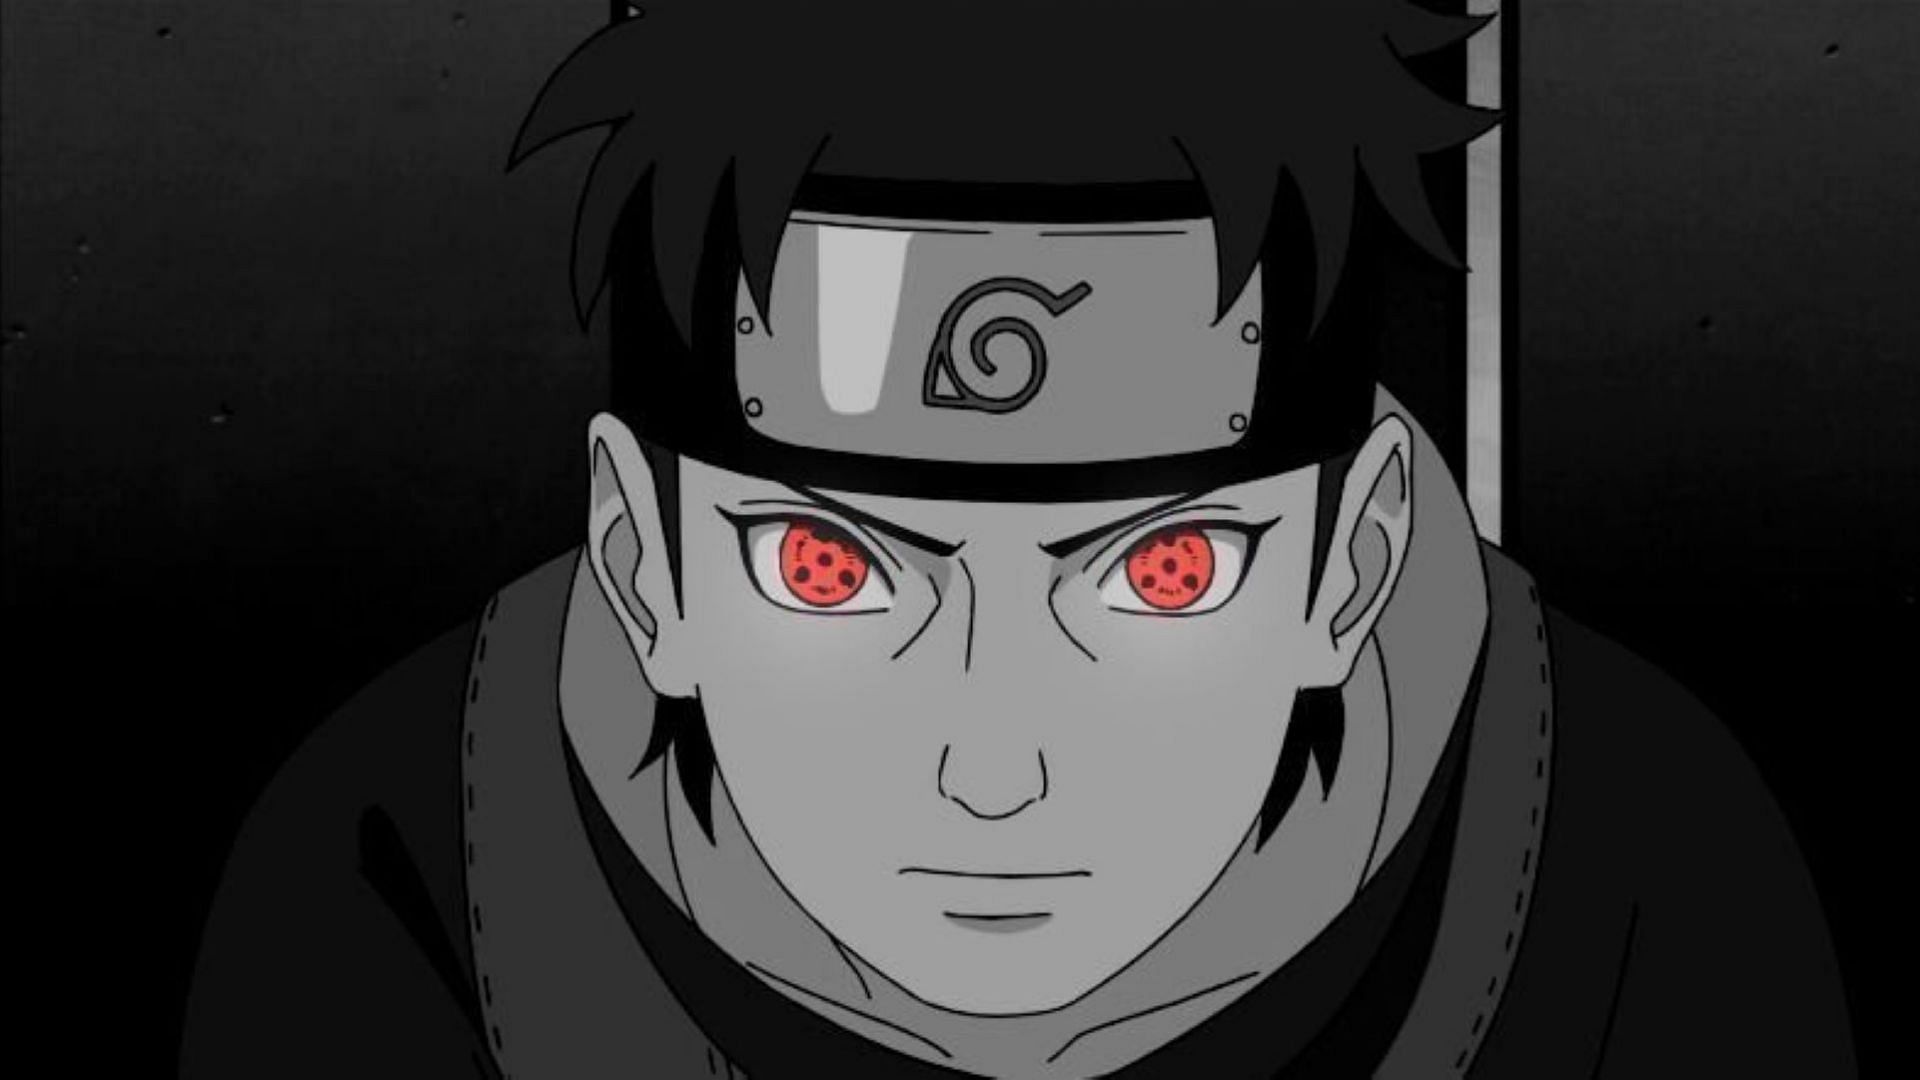 Taking a look at Shisui